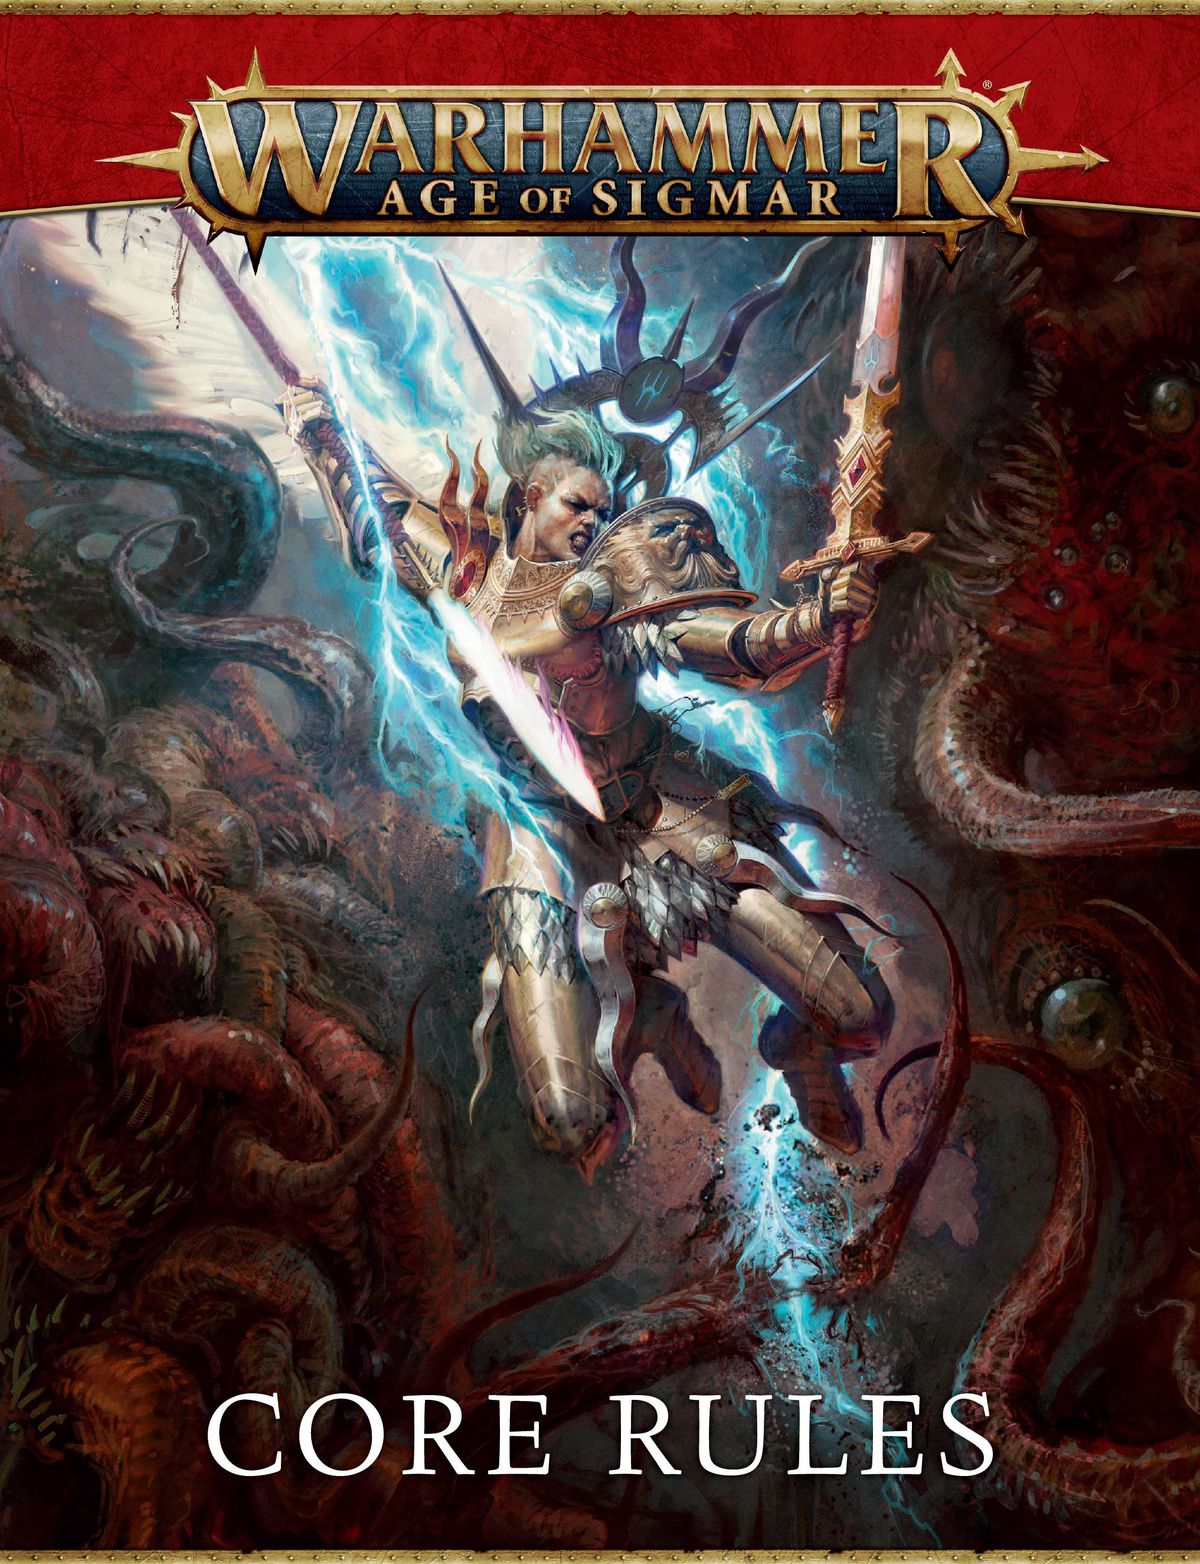 Cover art for the new Warhammer Age of Sigmar third edition Core Rules shows a Stormcast Eternal in battle with a Chaos beast.